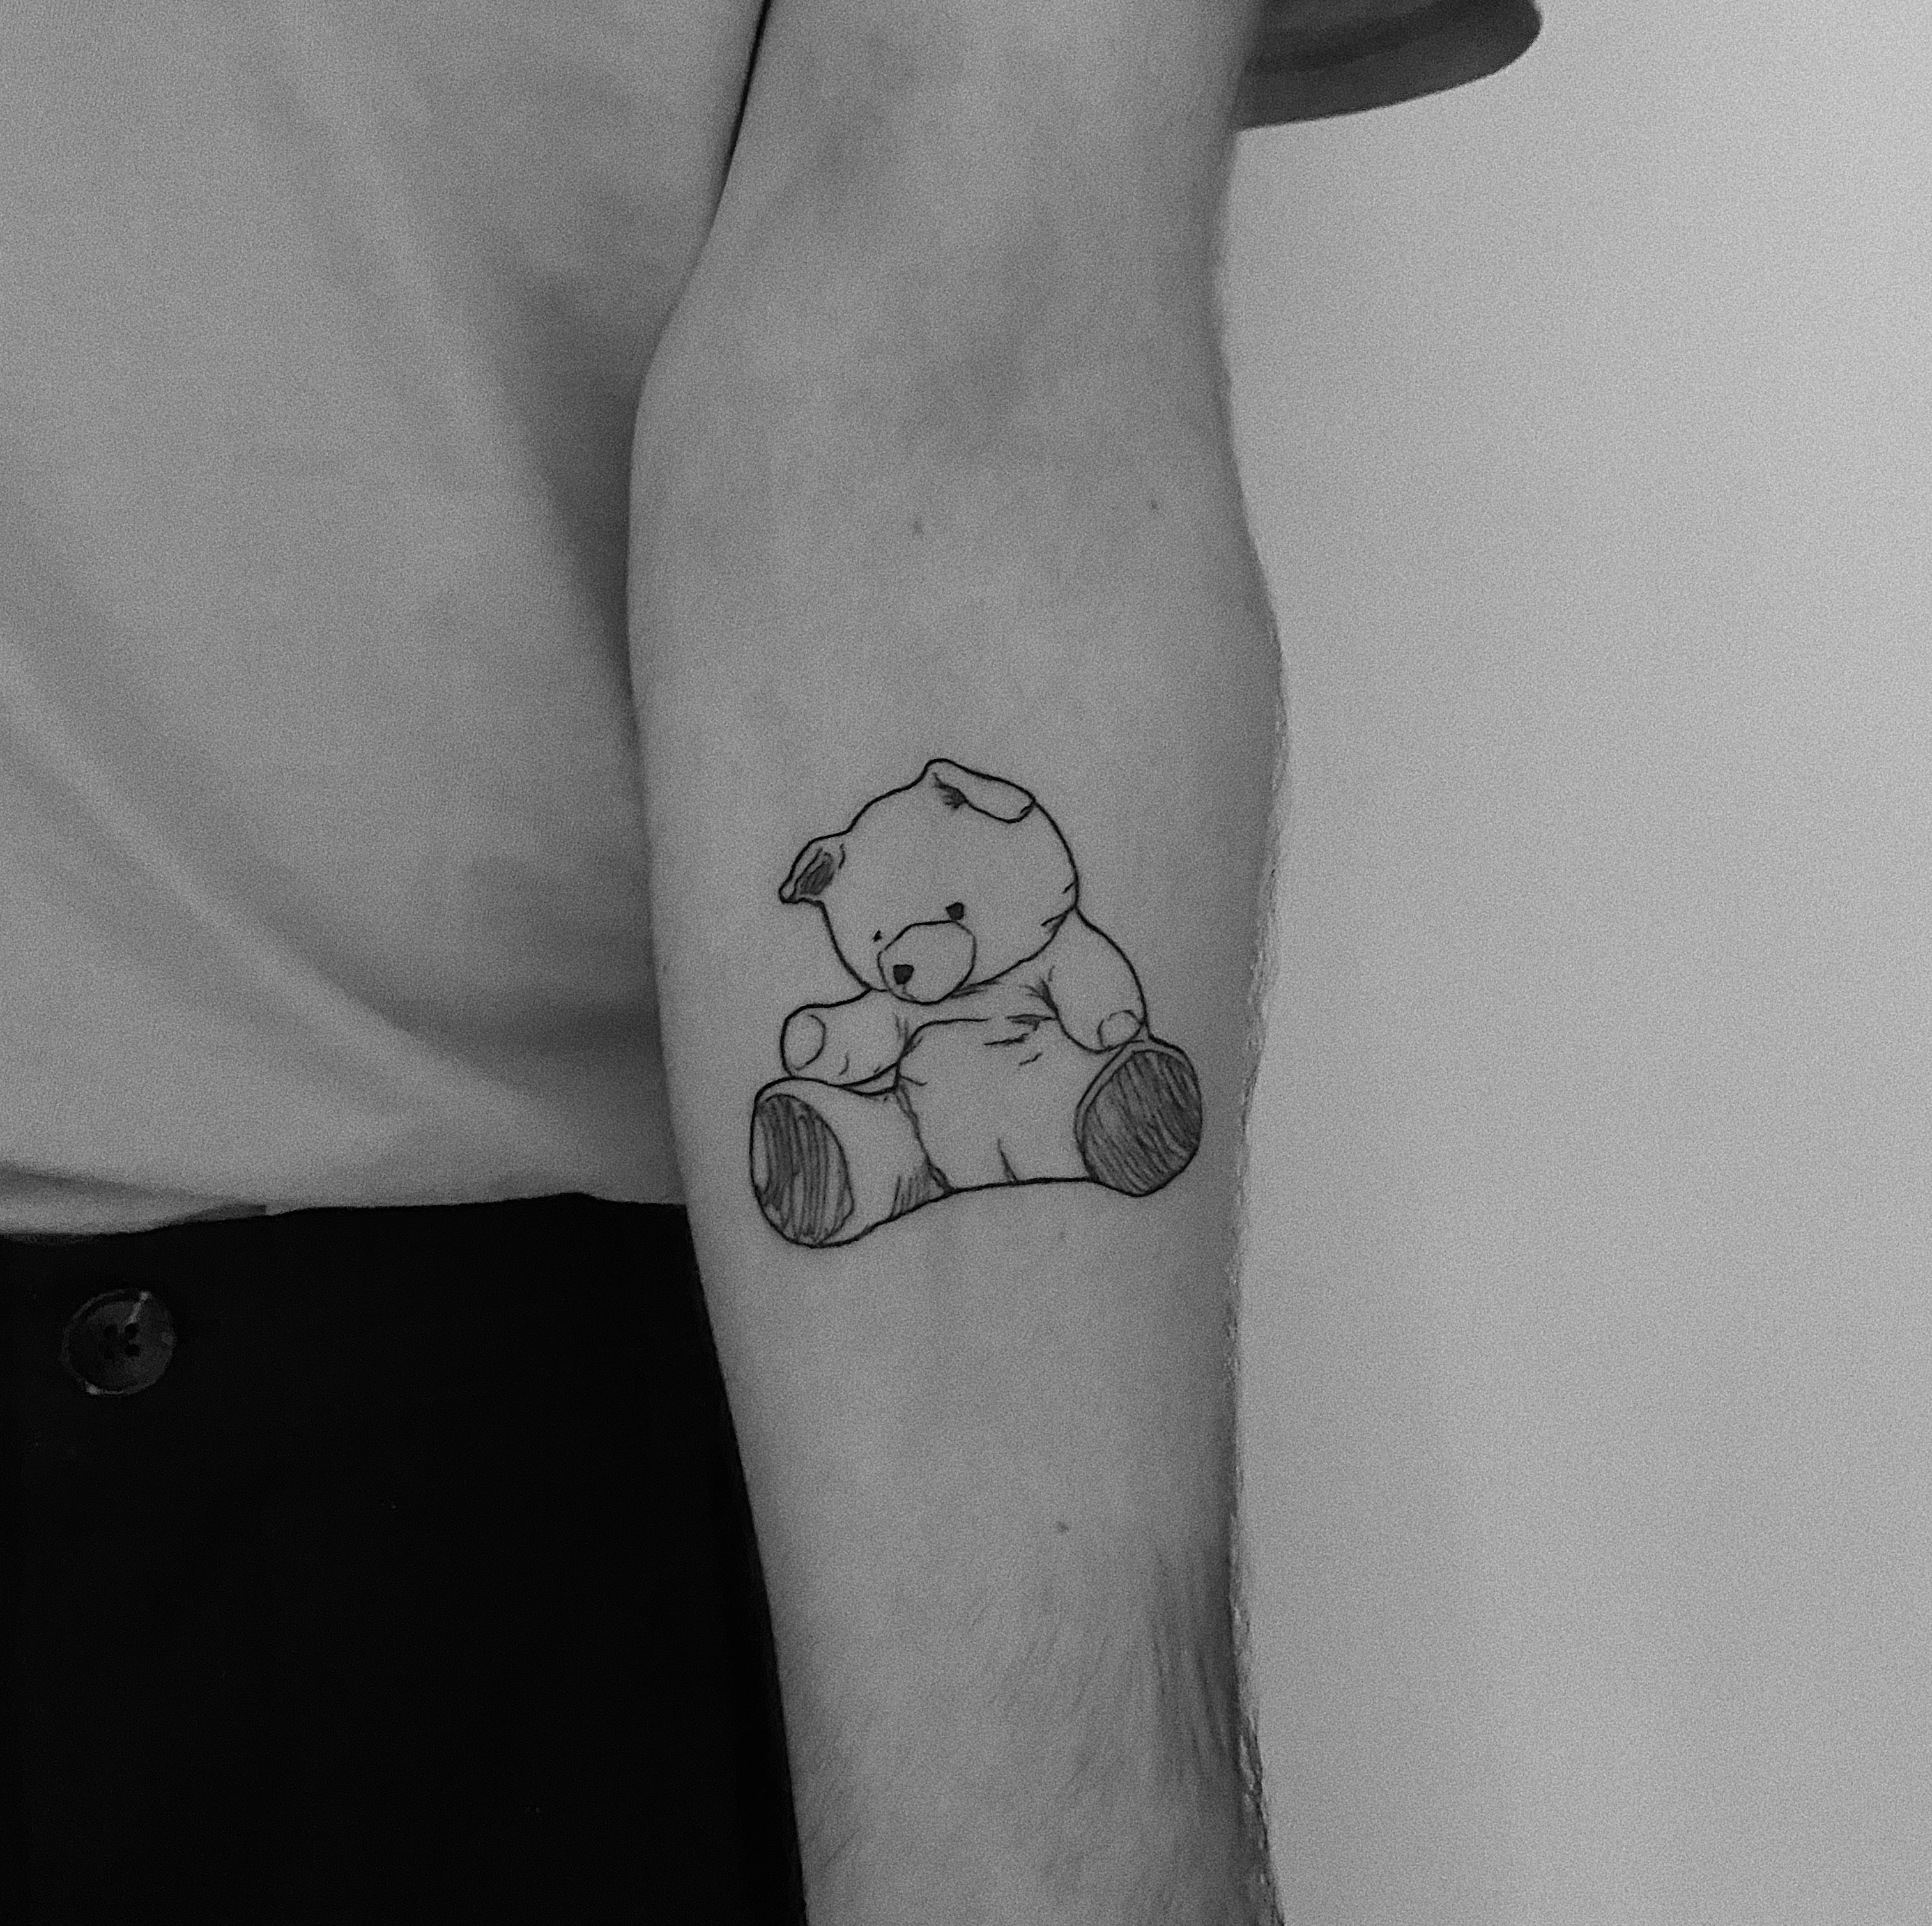 My Teddy Bear took me to get a new tattoo It makes me feel so cute   rlittlespace